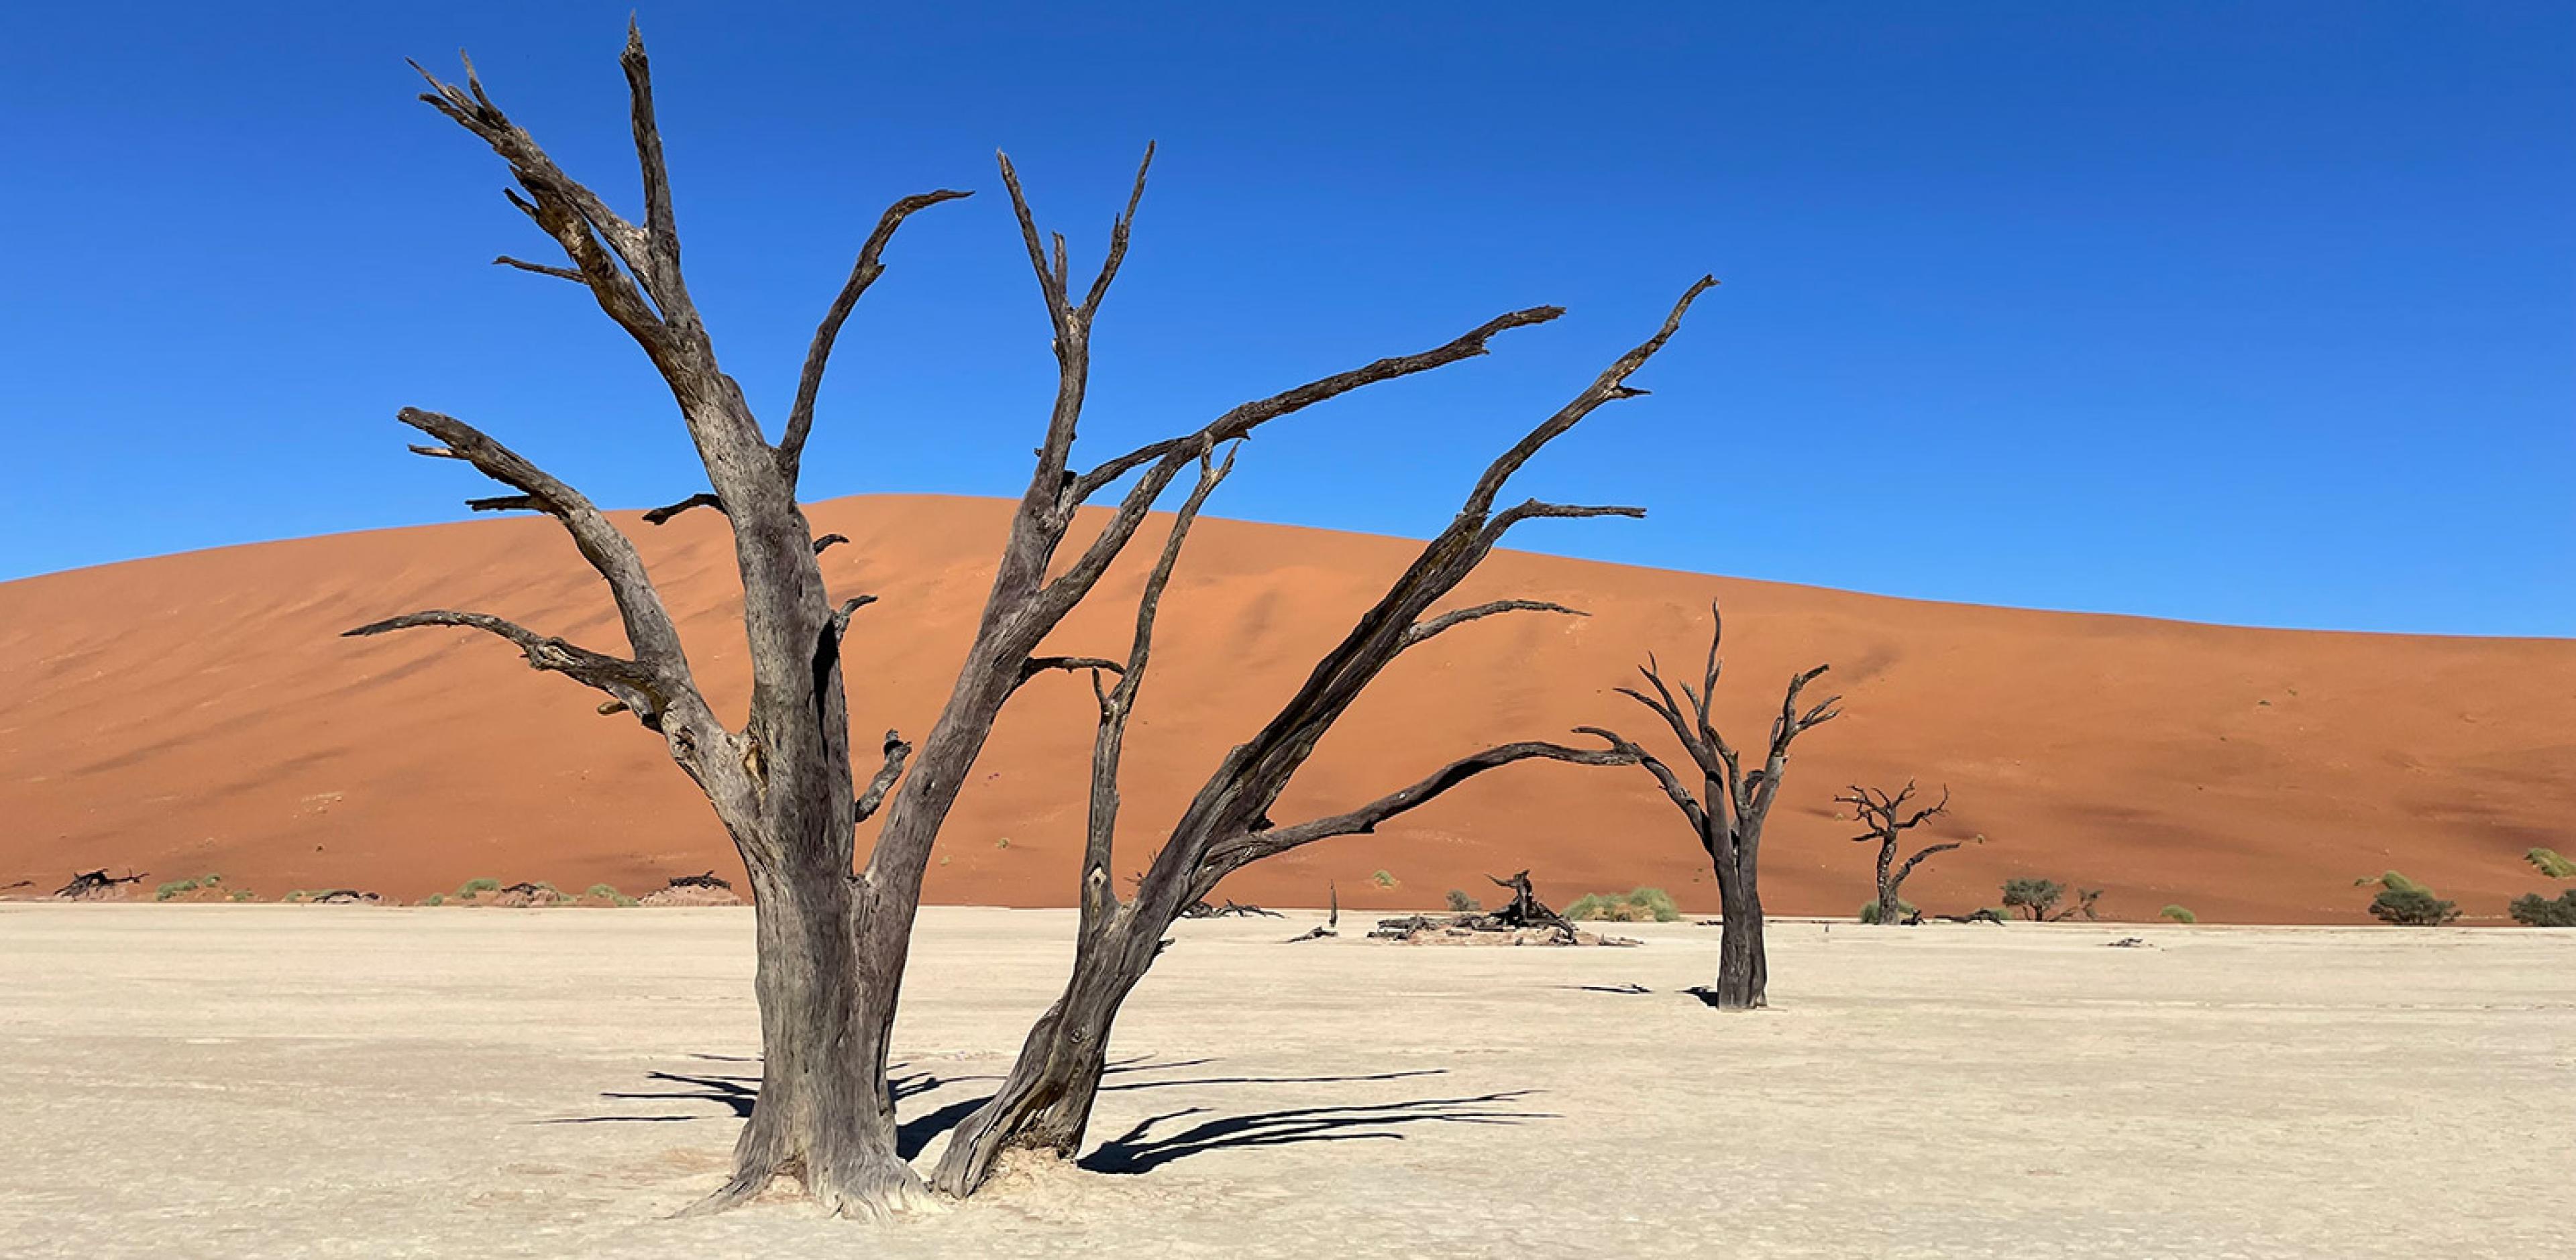 dead trees in desert with red sand dune mountain in background